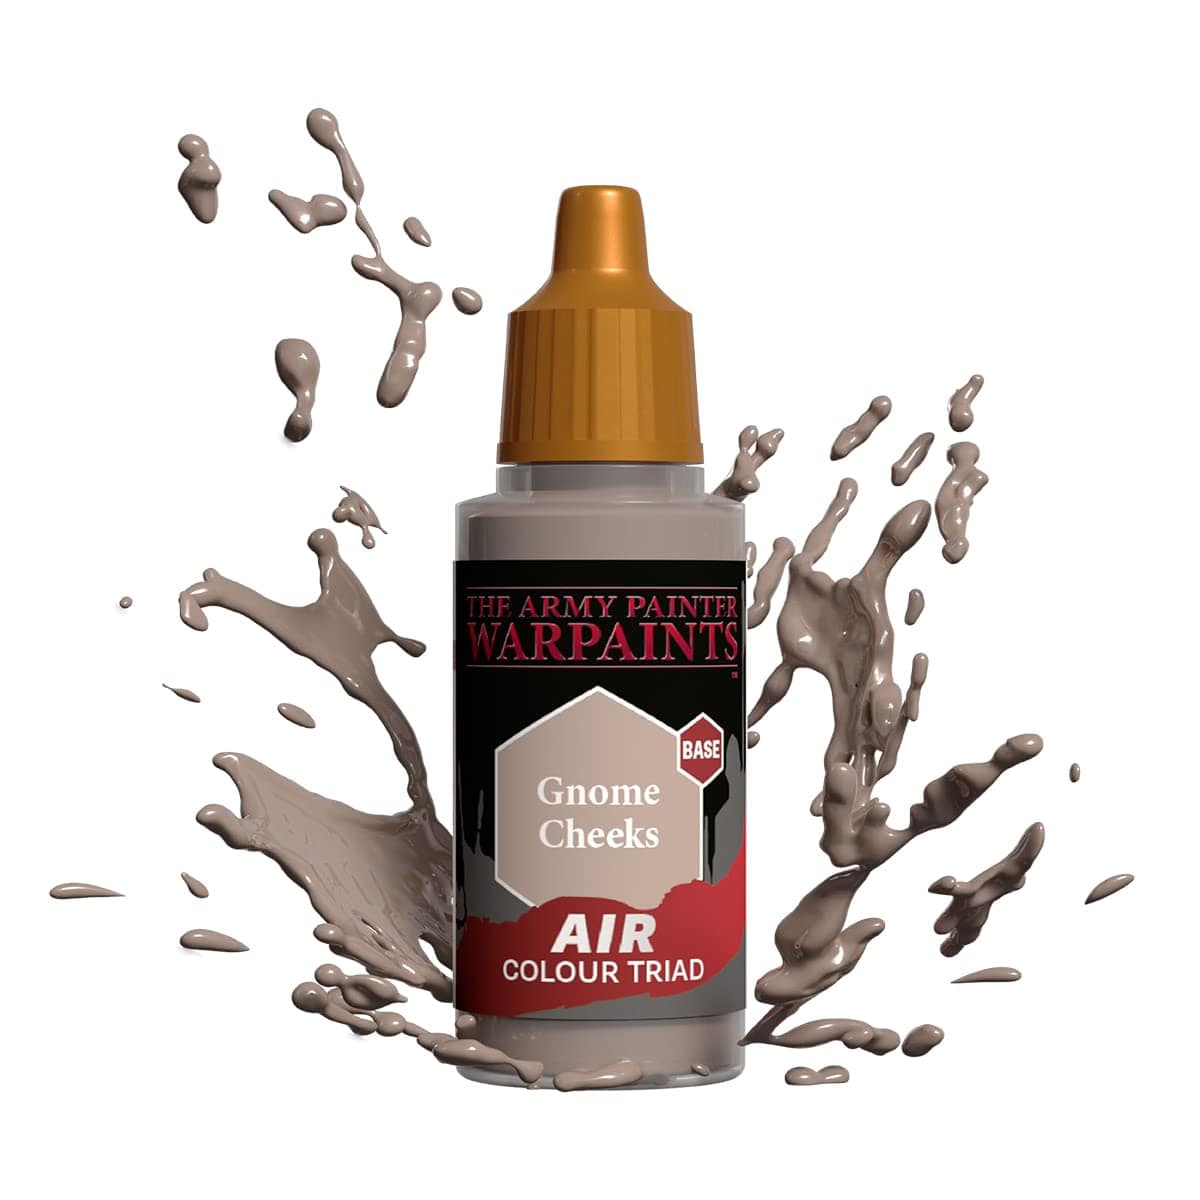 The Army Painter Accessories The Army Painter Warpaints Air: Gnome Cheeks 18ml